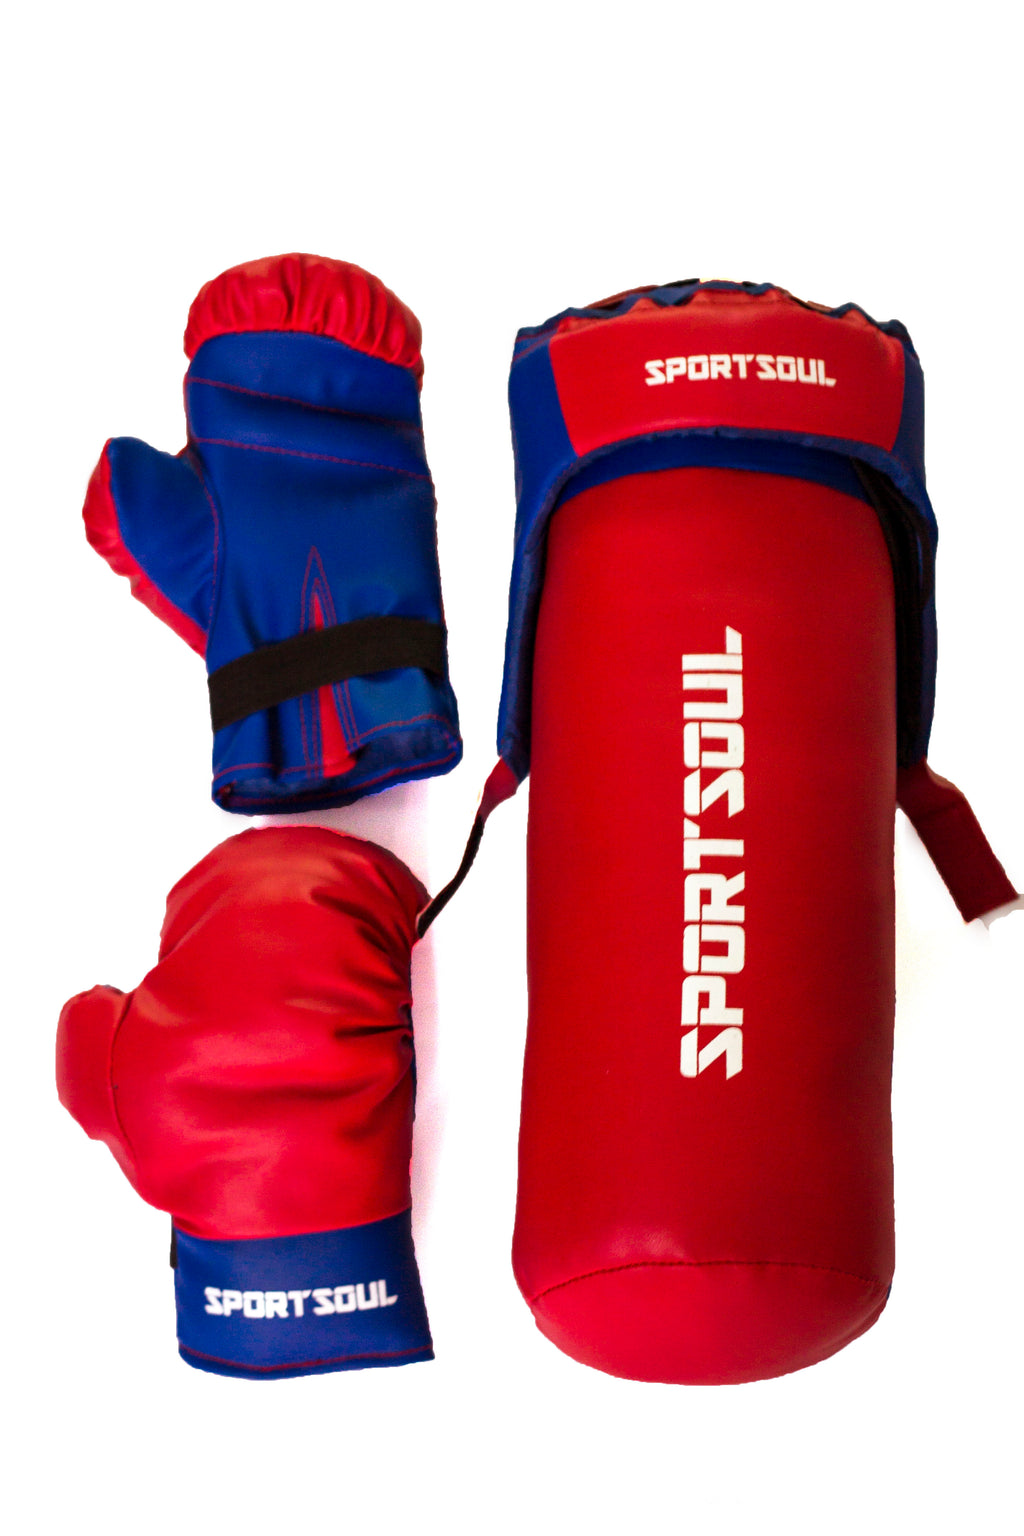 Buy Boxing Bags-Punching Bags-Boxing Equipments Online India